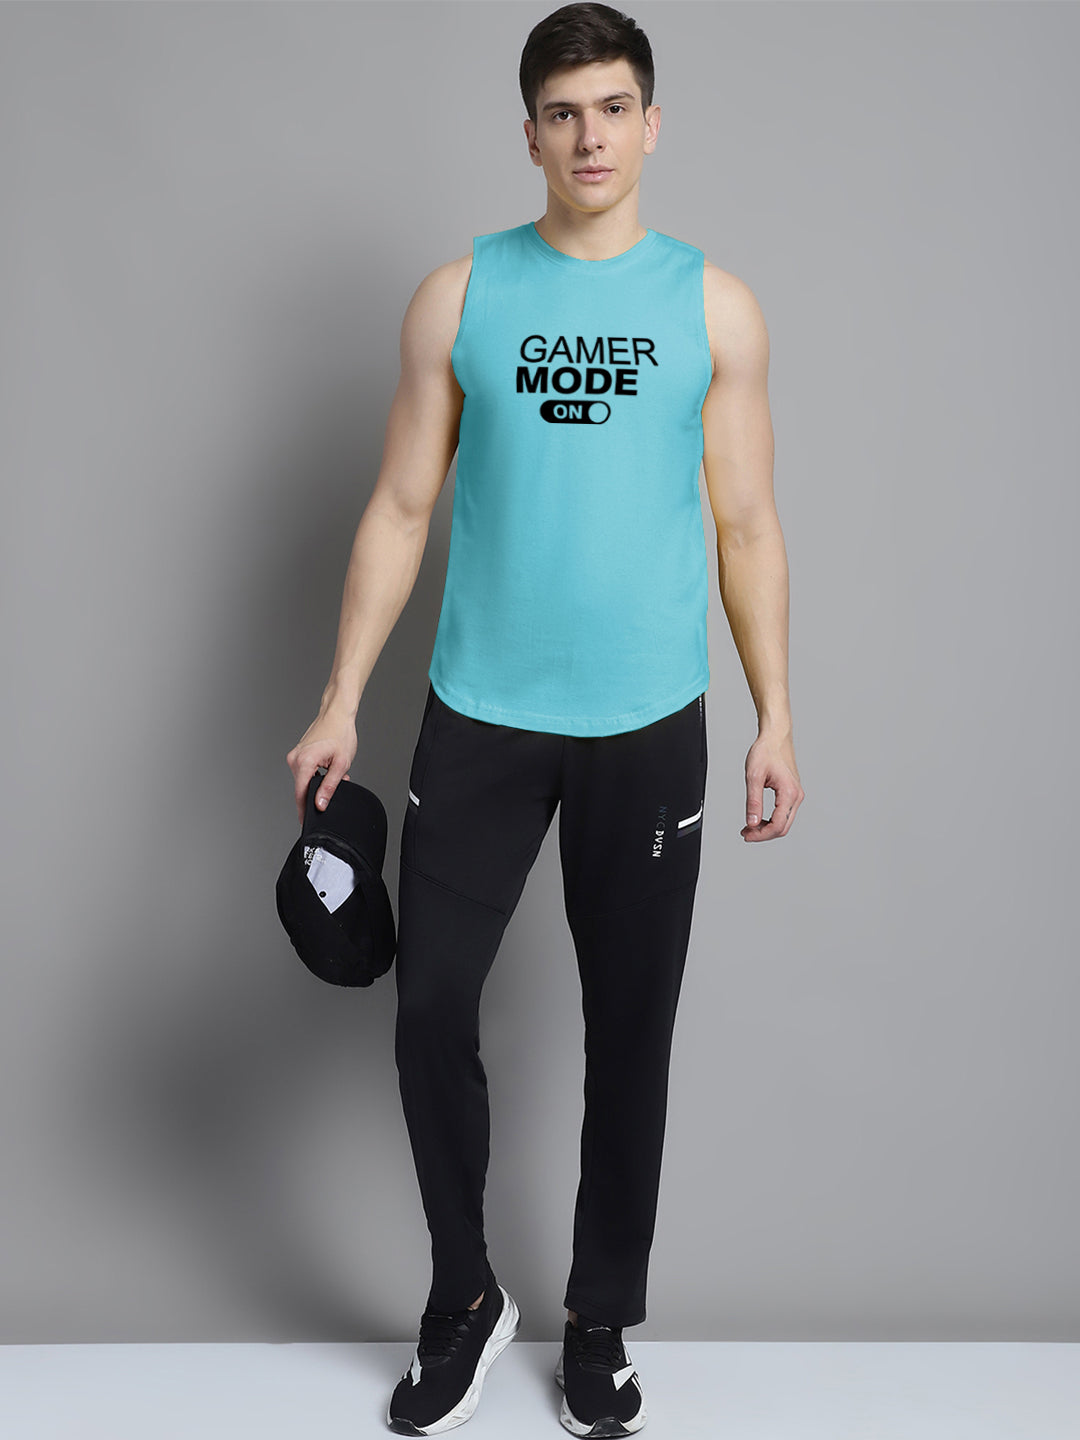 Fbar Gamer Mode On printed Pure Cotton Training Vest - Friskers